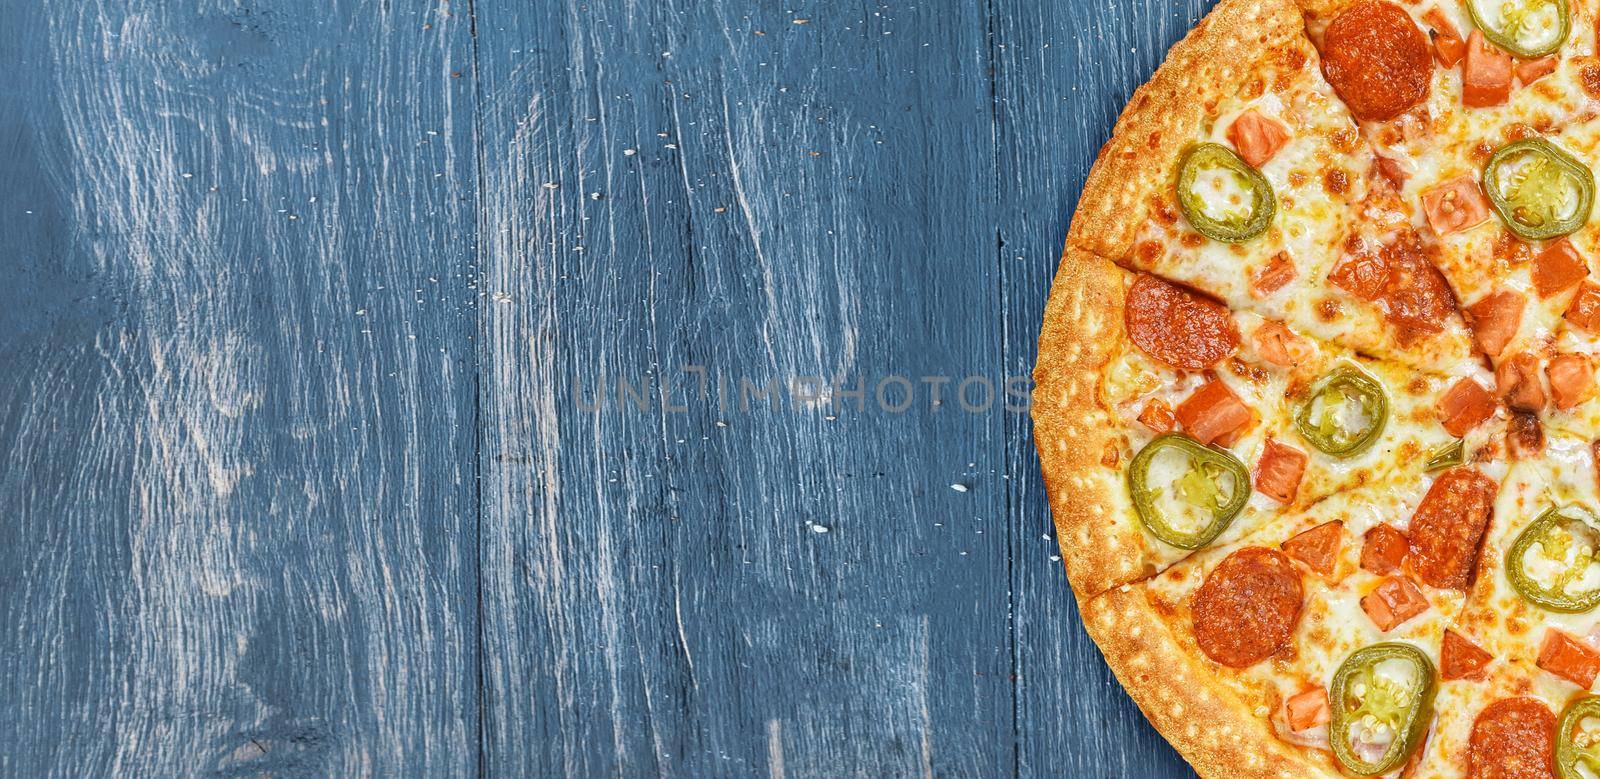 pizza close-up on a wooden surface